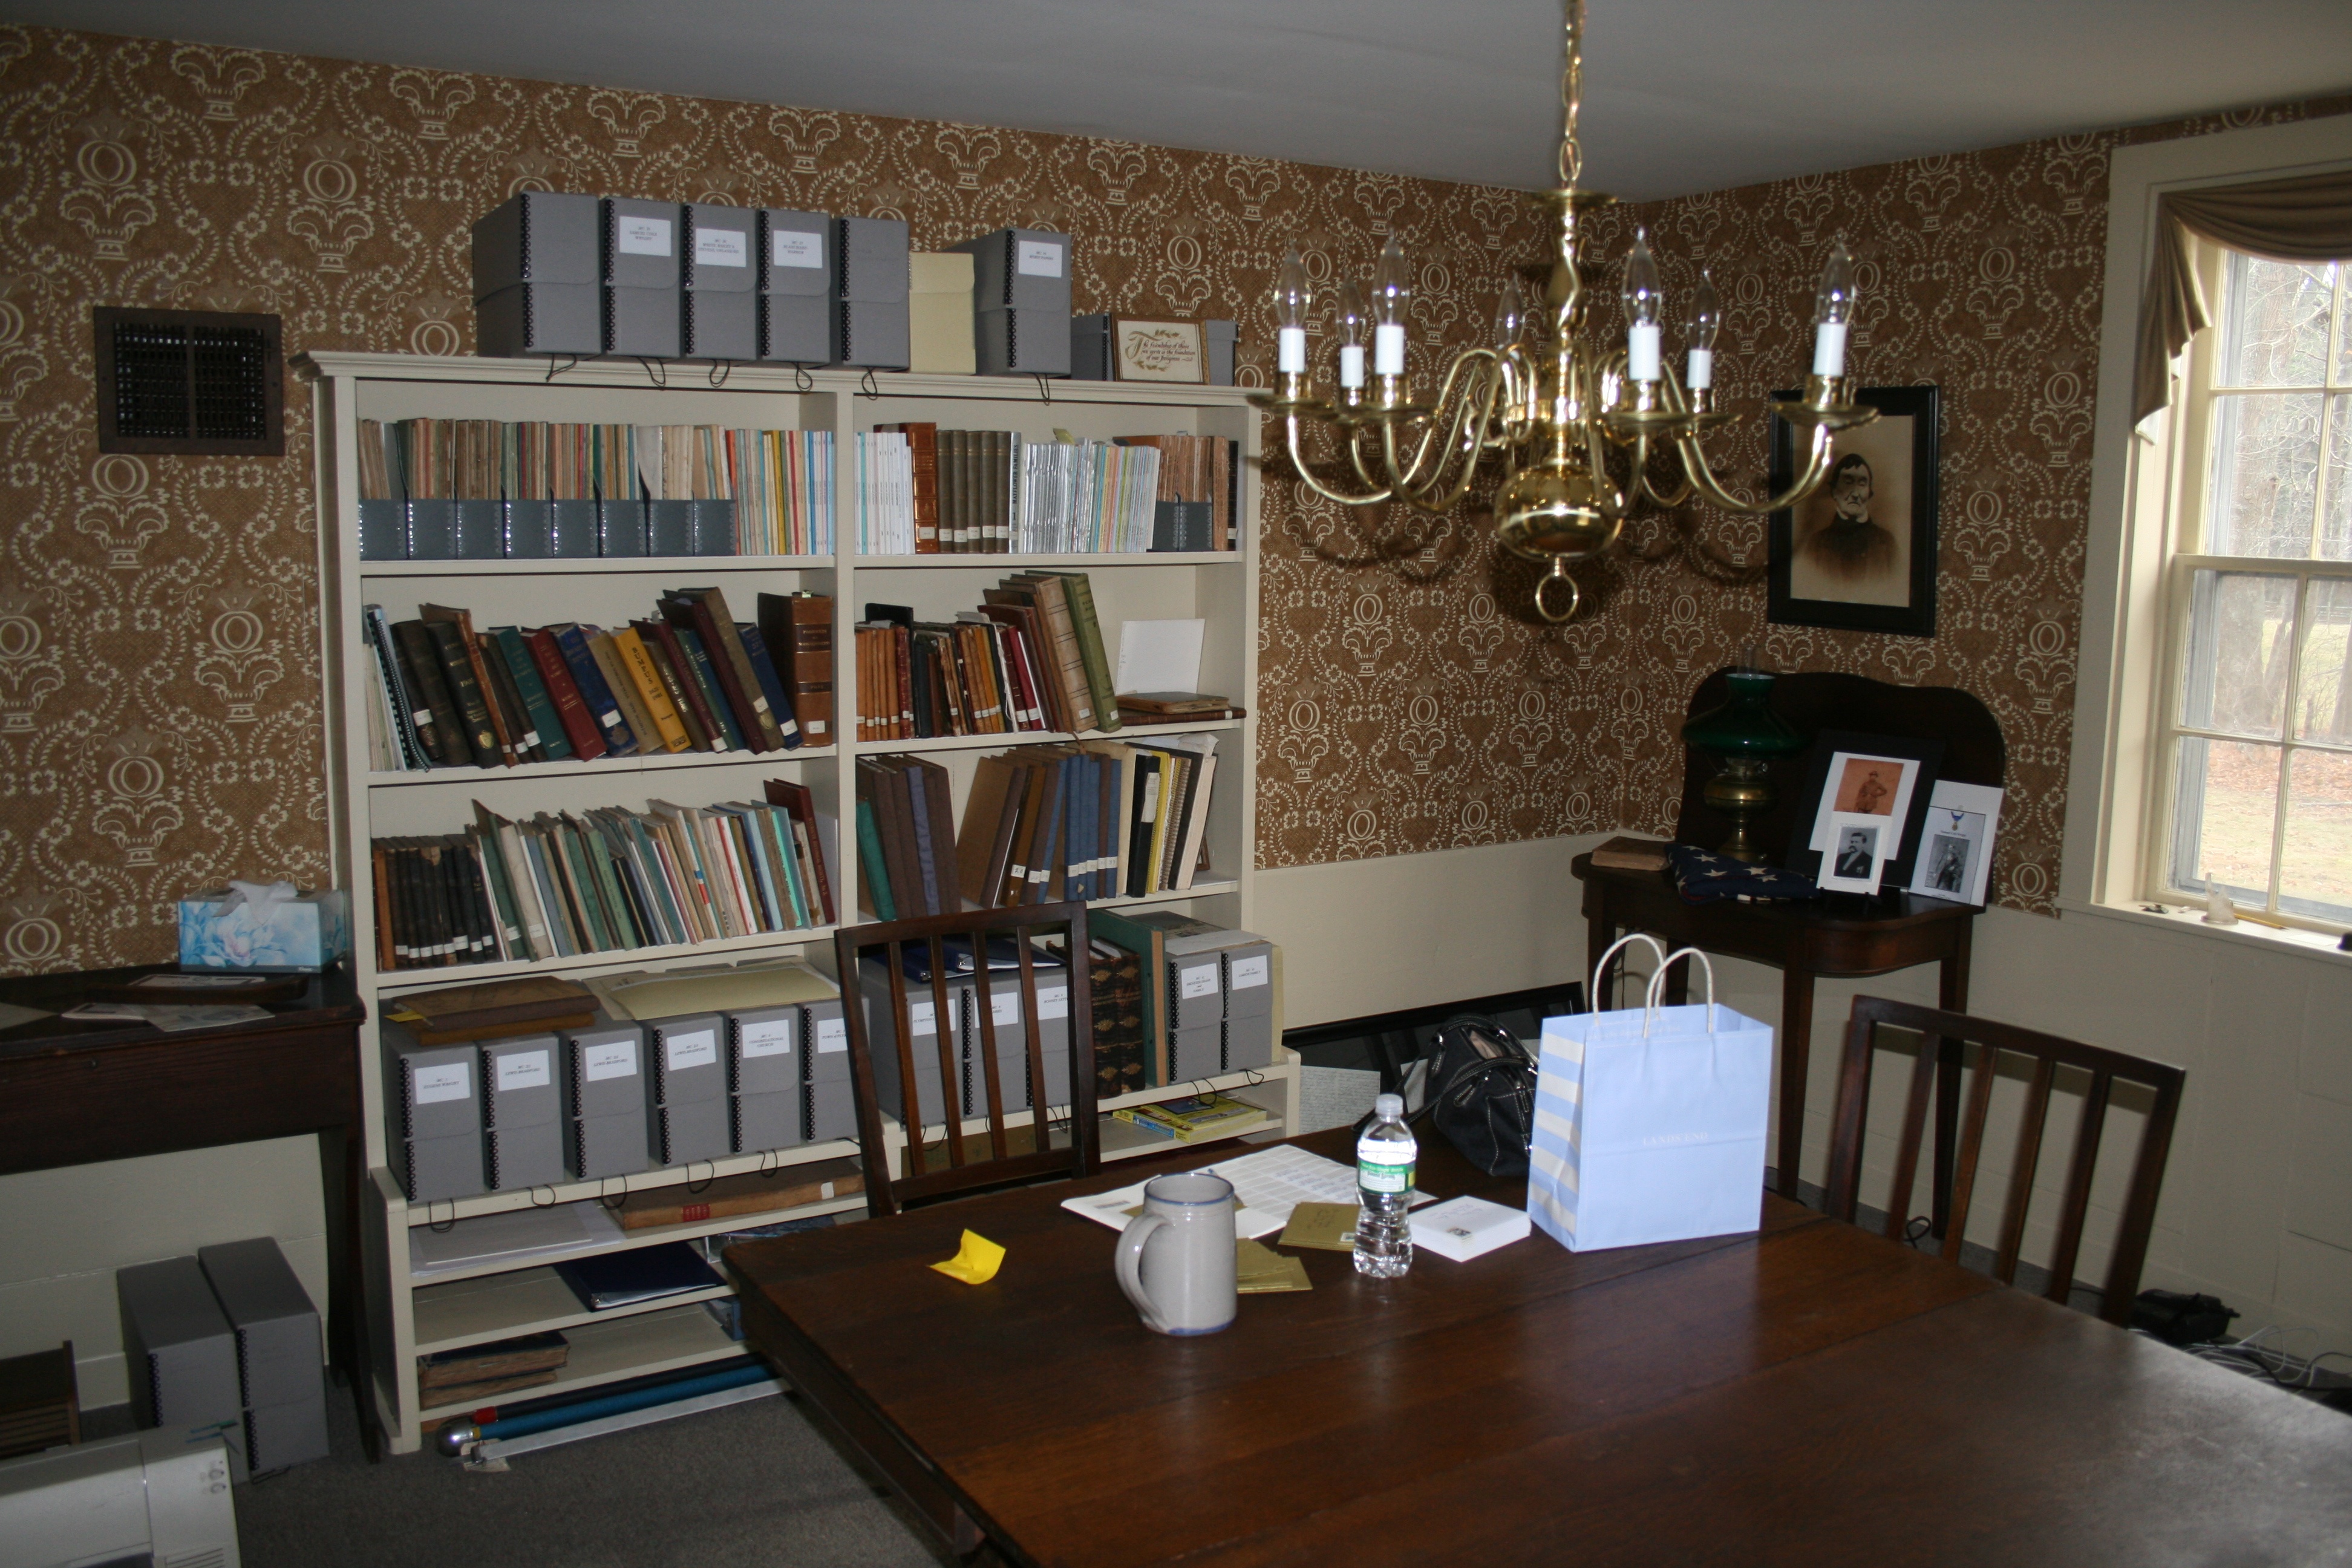 Library room at the Plympton Historical Society